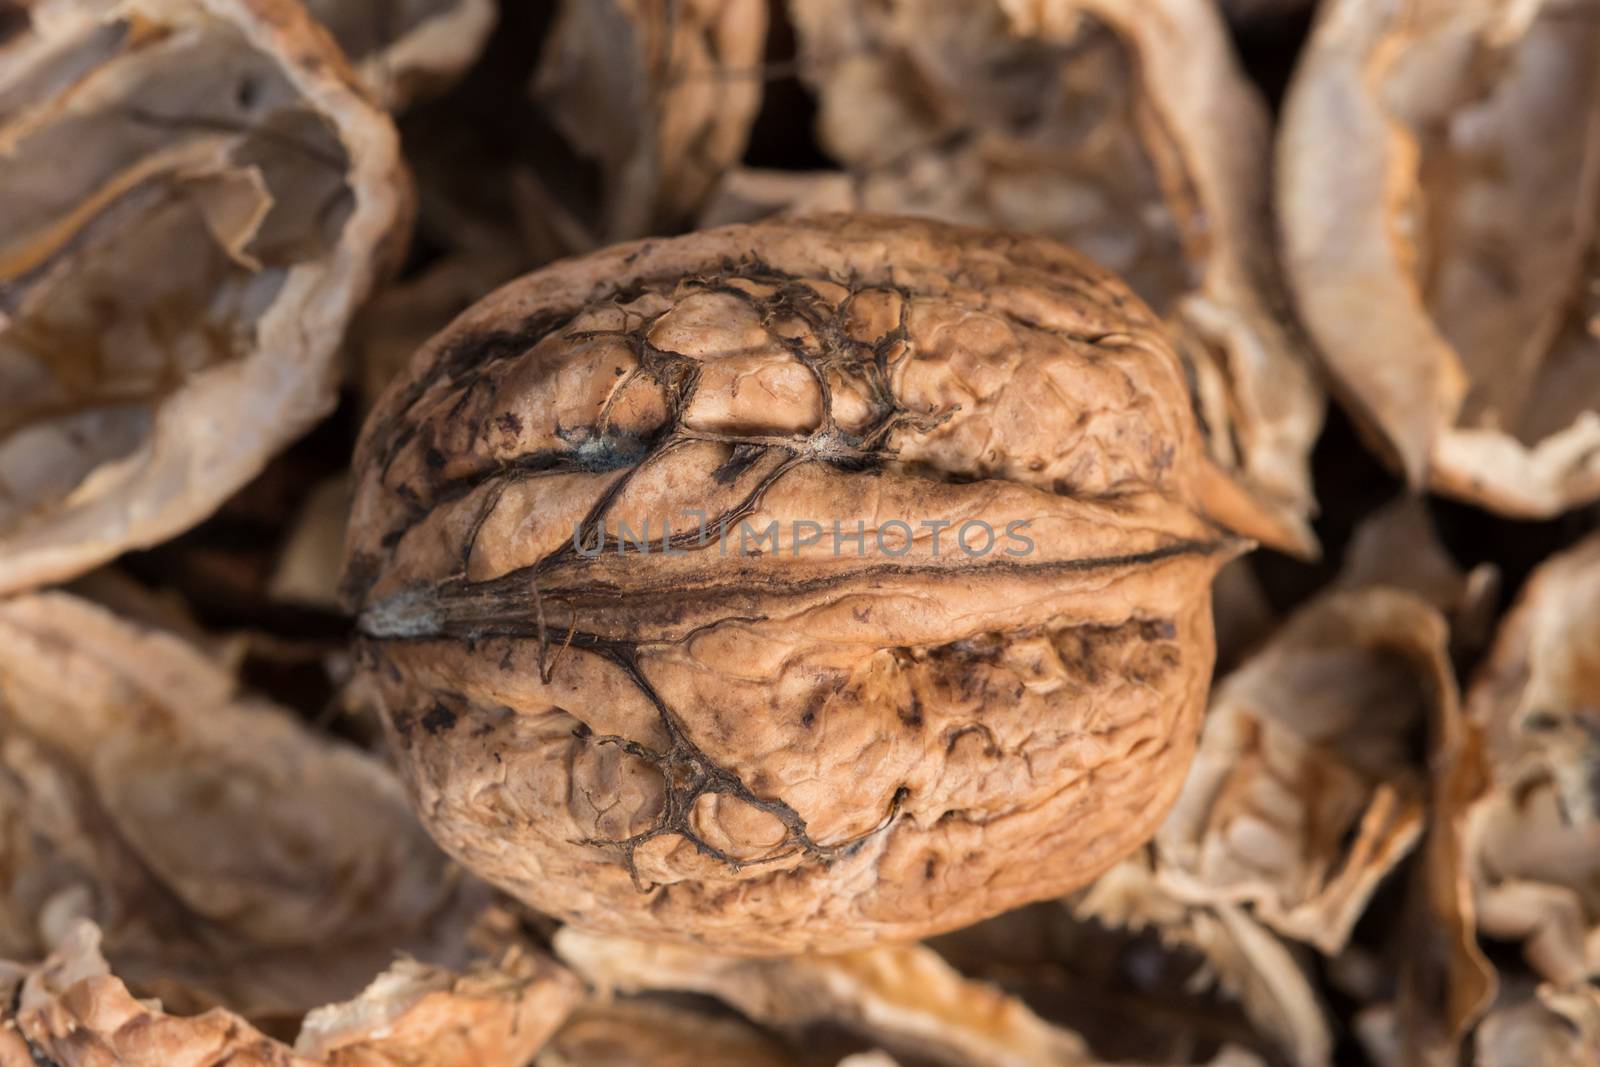 One complete walnut with cracked walnut shells. Pieces of nutshells. Close up. by petrsvoboda91